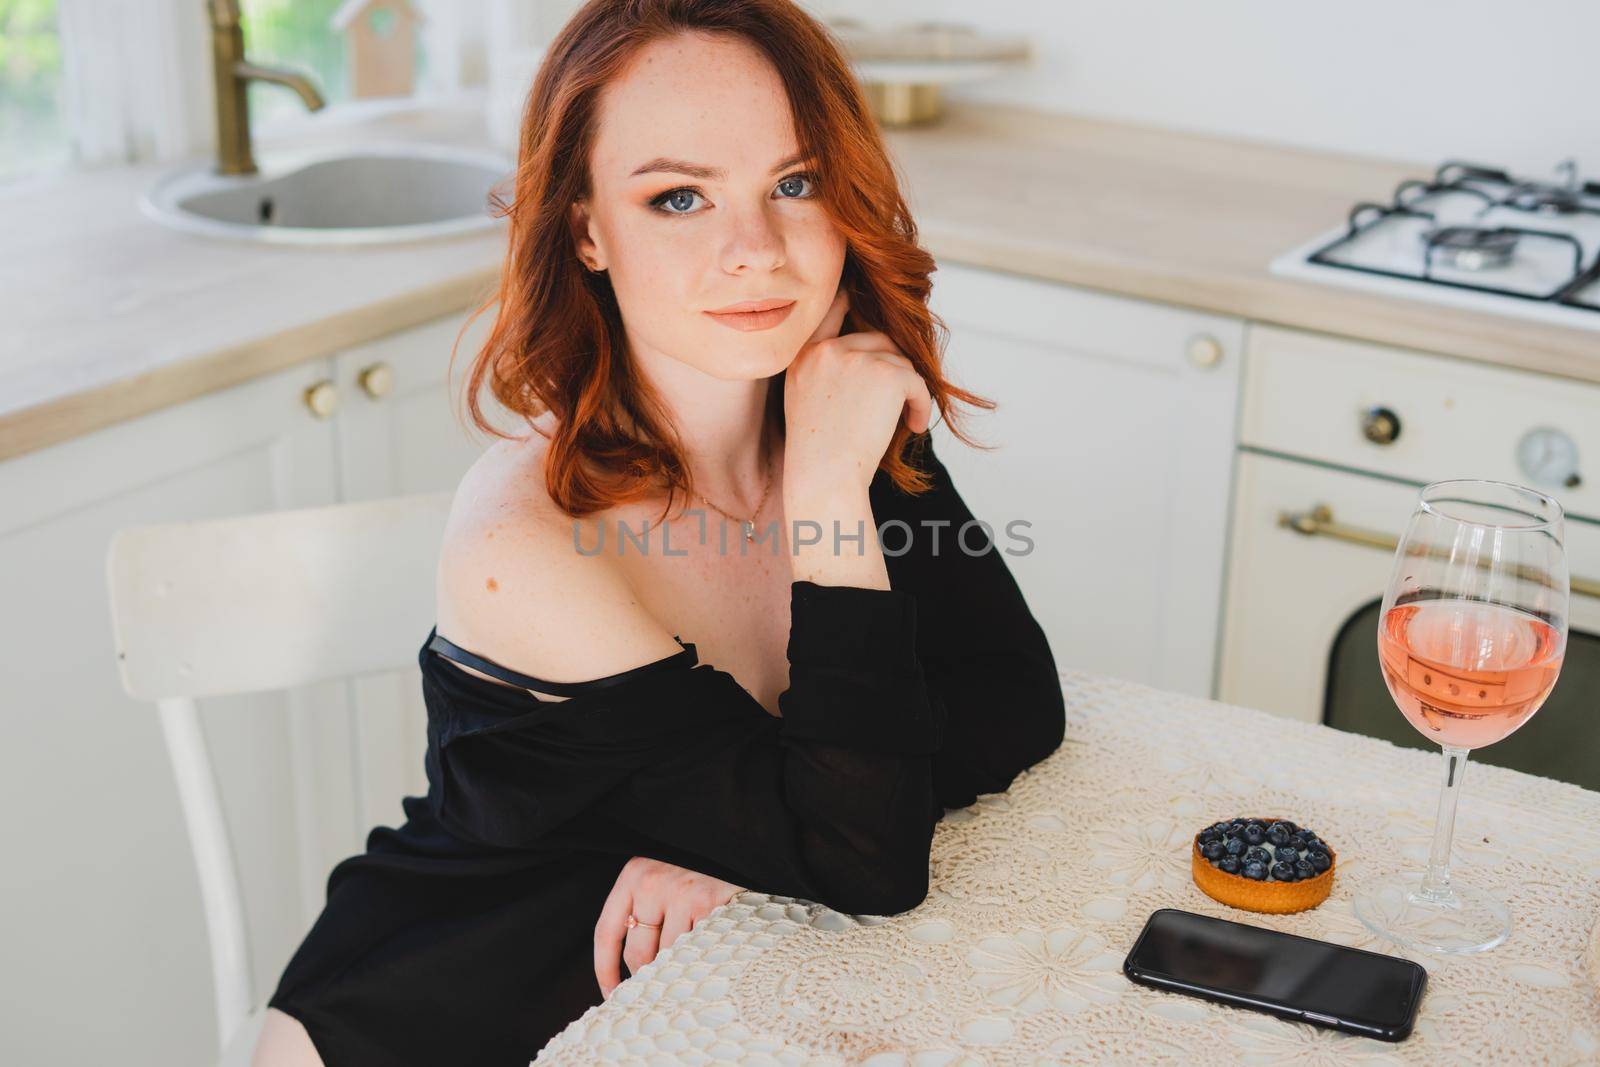 A beautiful girl with red hair holding a smartphone. There's a glass of rose wine on the table. The girl is resting.